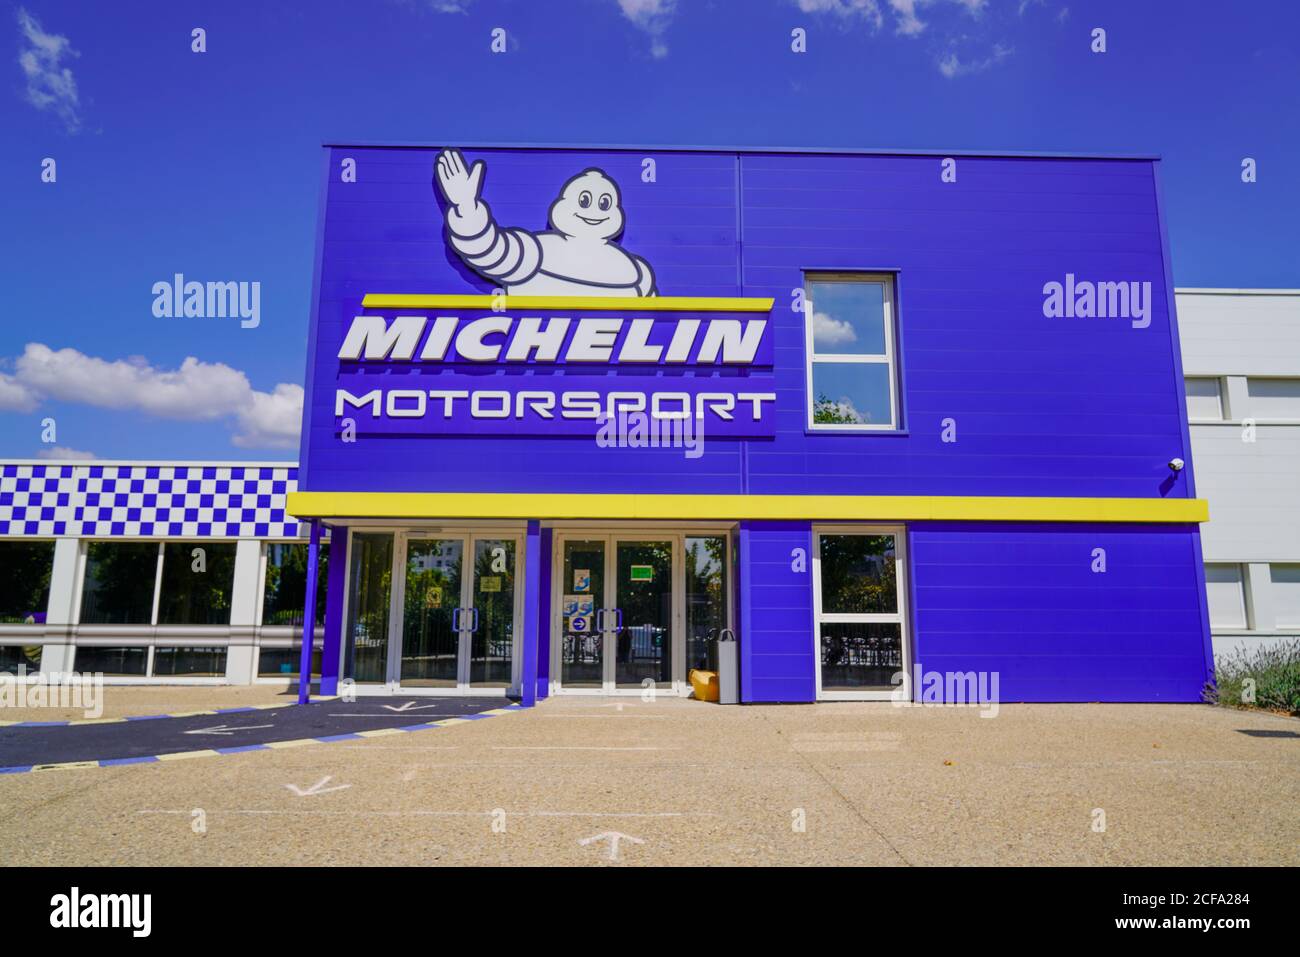 Clermont Ferrand , auvergne / France - 09 23 2019 : Michelin motorsport logo and text sign front of headquarter of tires manufacturer sport brand base Stock Photo